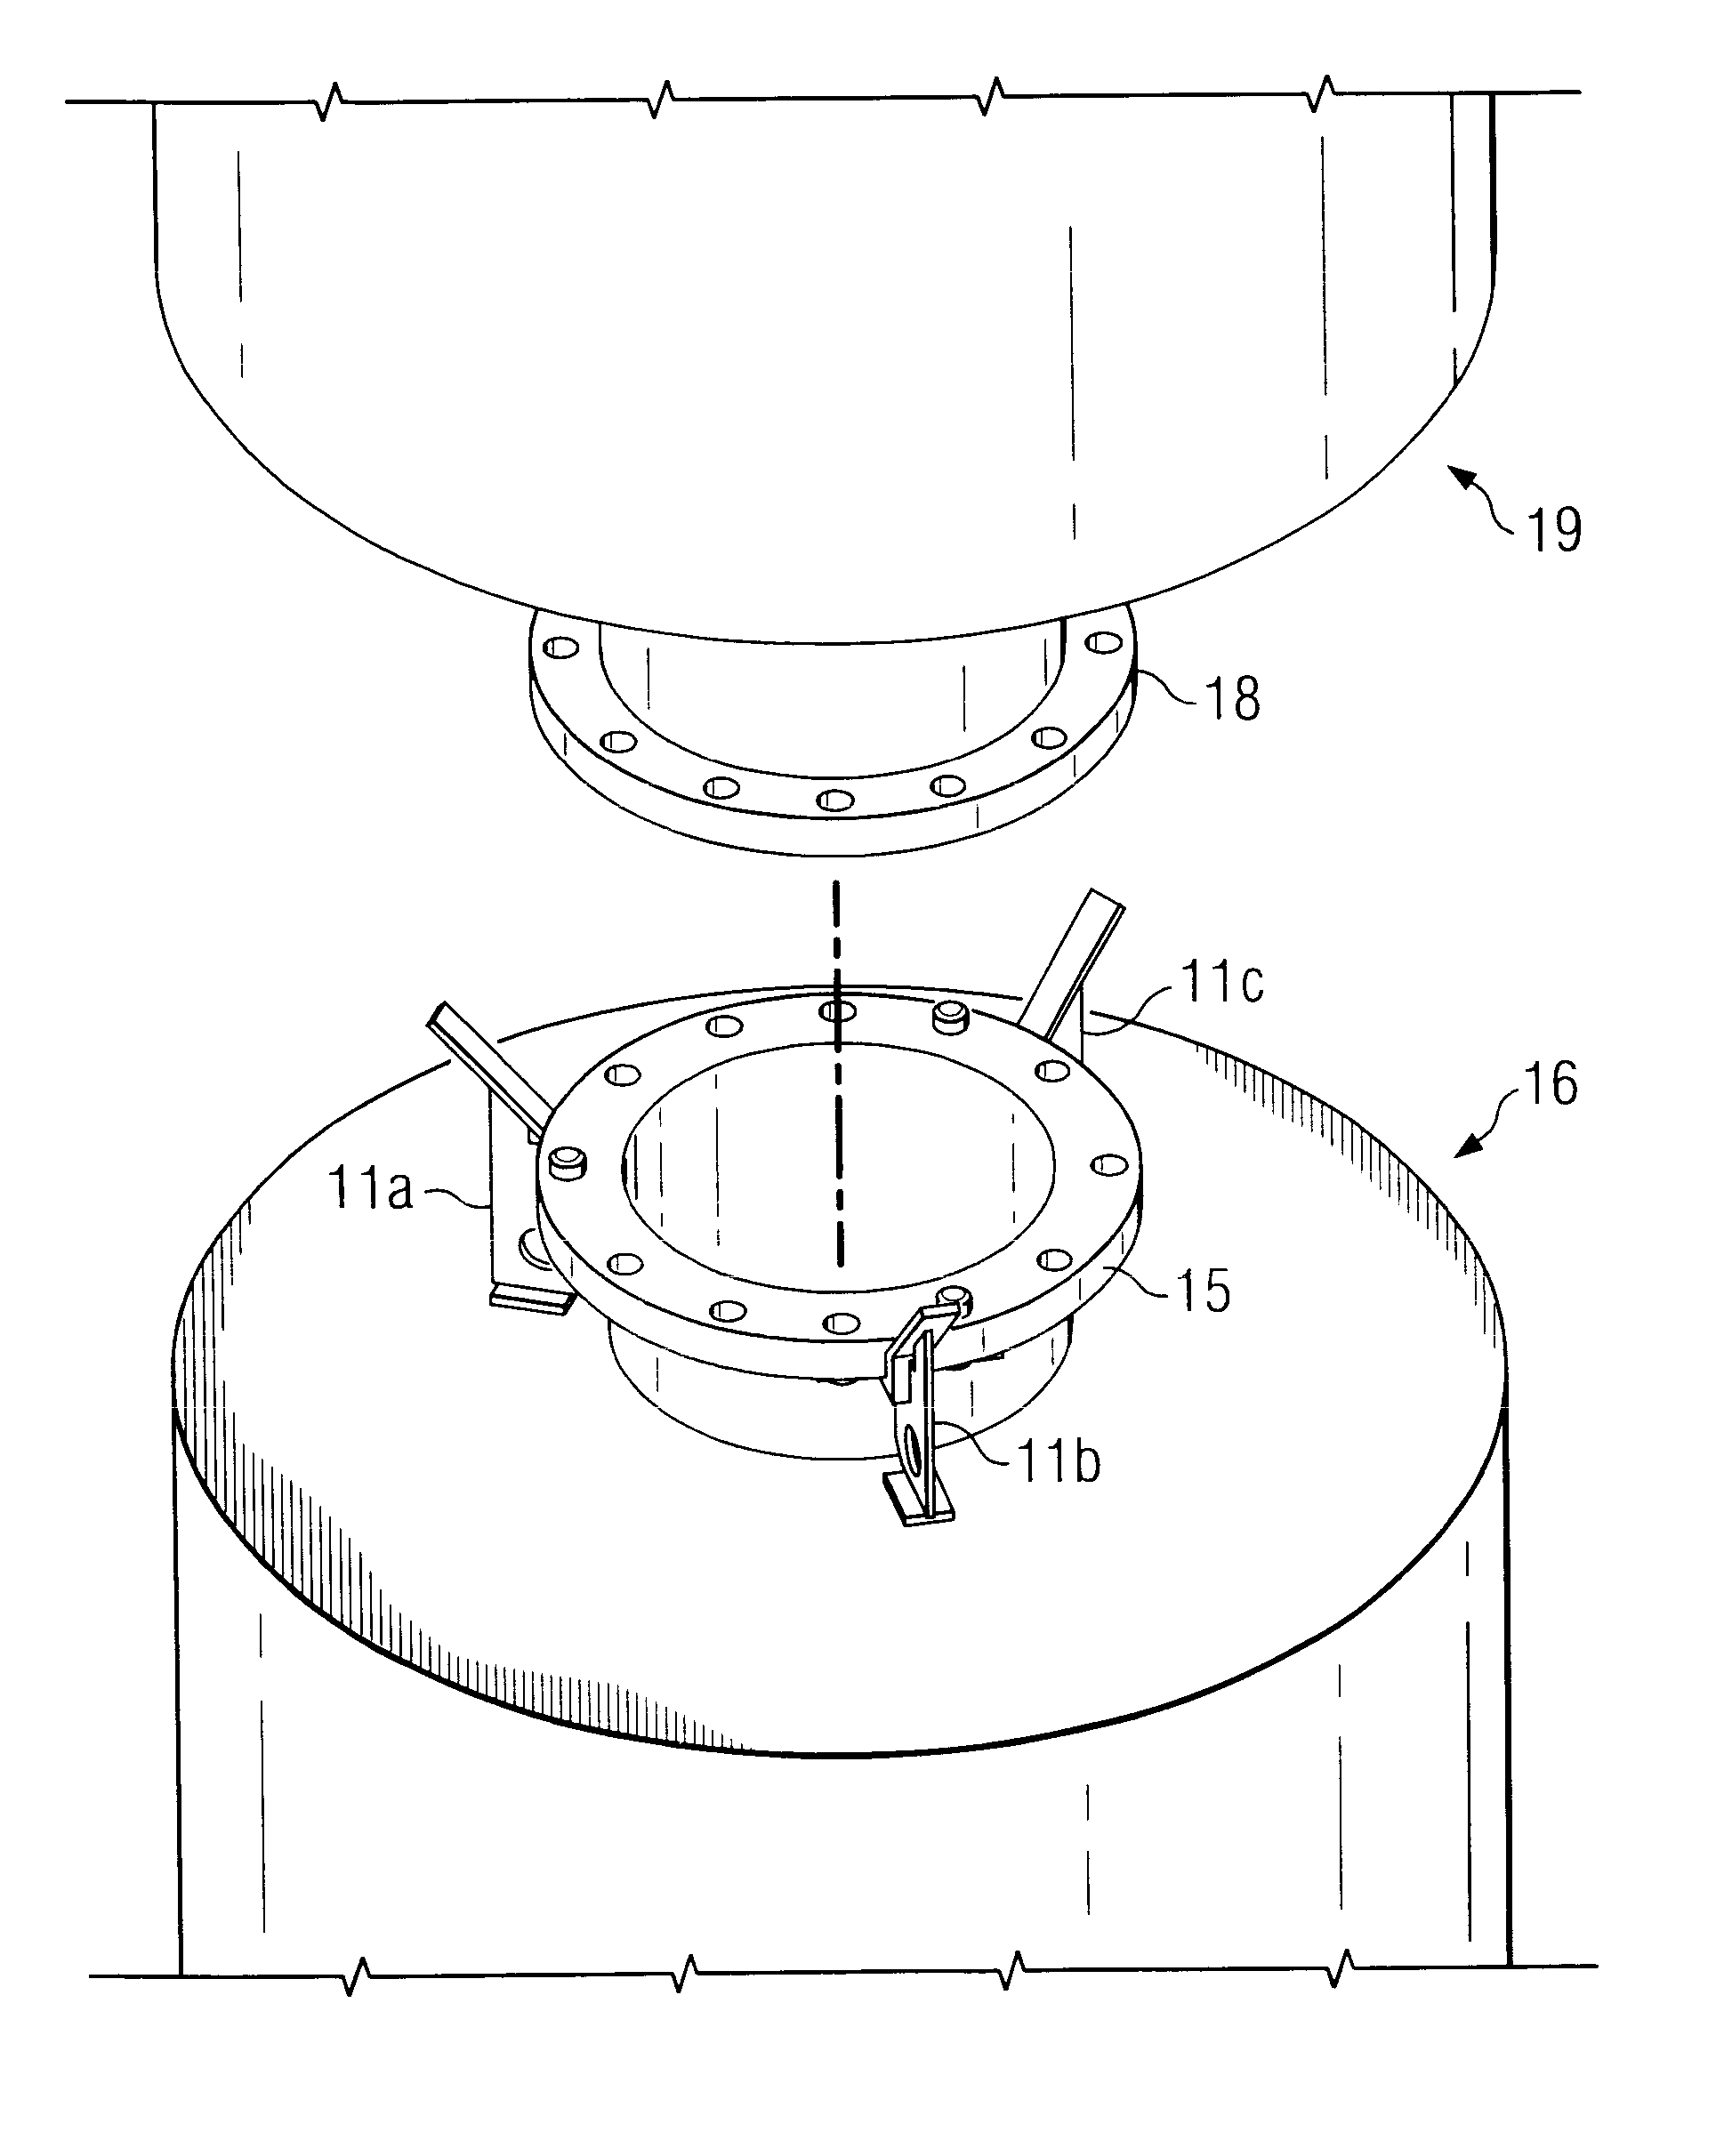 Alignment tool for pipe couplings